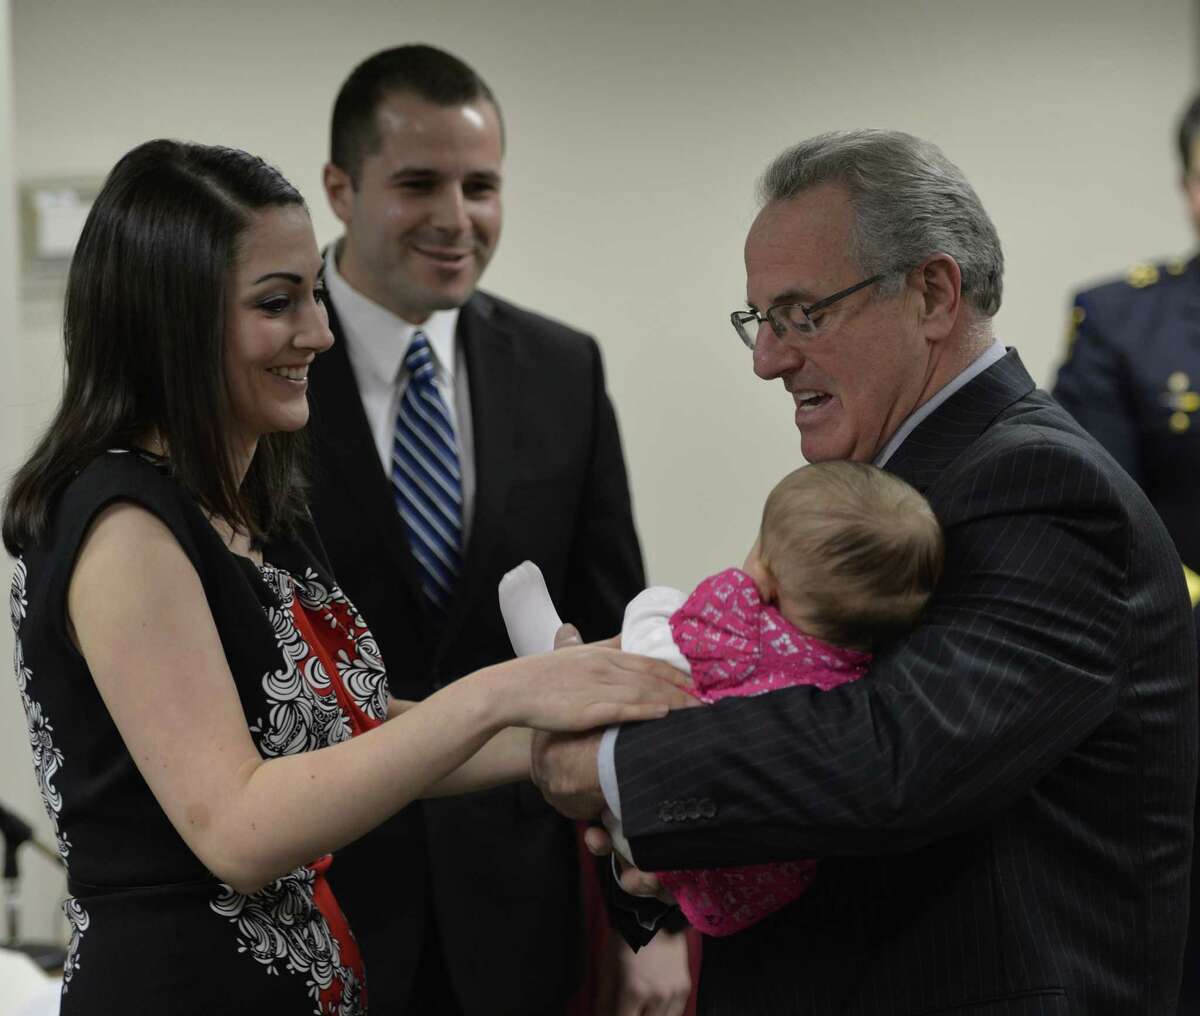 Troy Mayor Lou Rosamilia holds baby Callihan, daughter of Ryan MacDonald, center, and Jordan MacDonald, left, so that Jordan can pin Ryan's police shield on his jacket after being sworn in as a new member of the Troy Police Friday afternoon, Feb. 14, 2014, in Troy, N.Y. (Skip Dickstein/ Times Union)